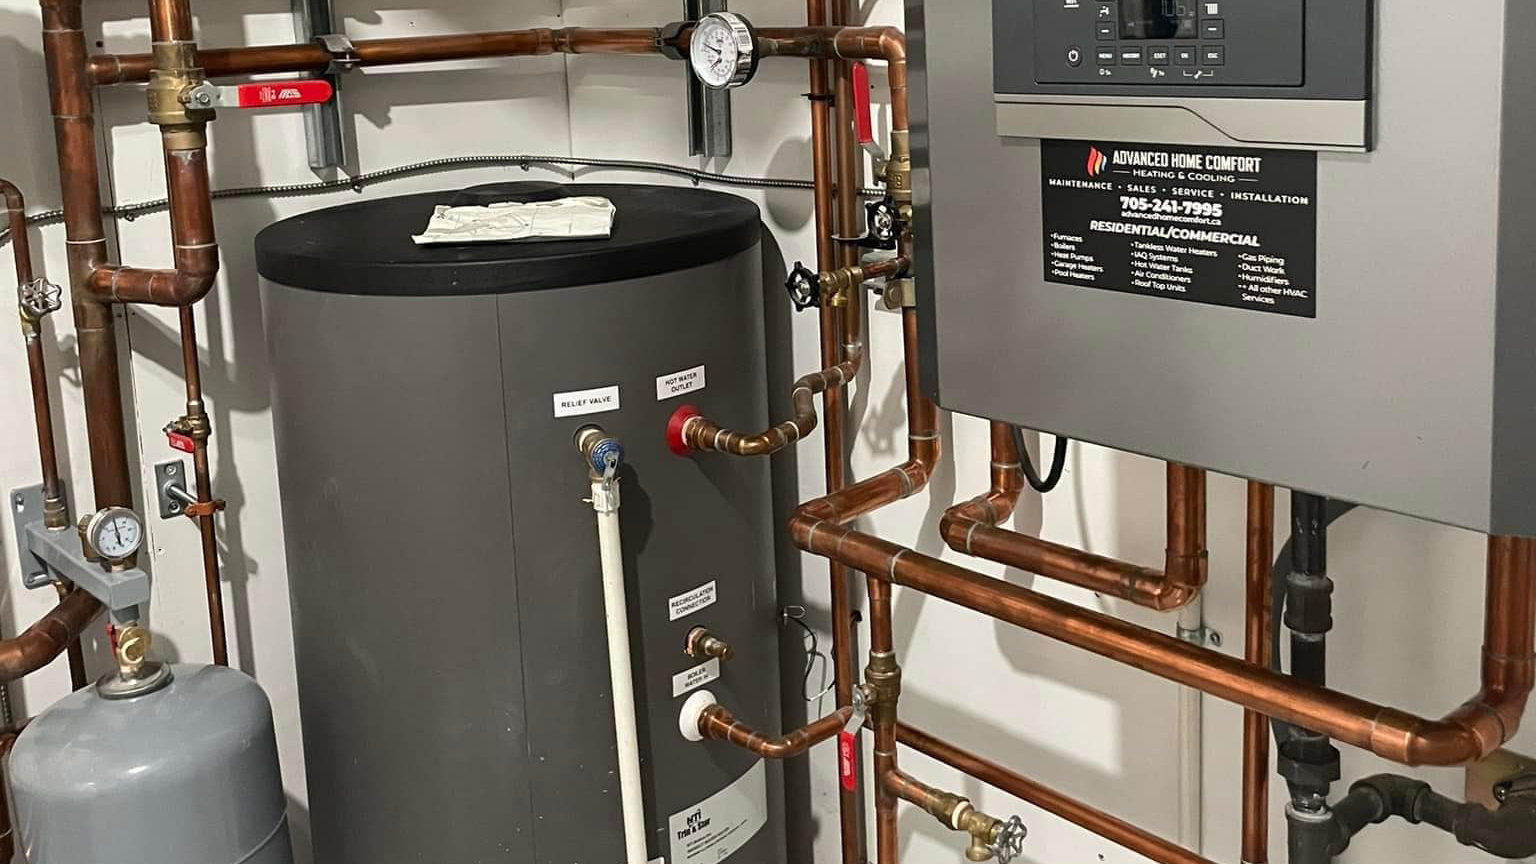 Energy Efficiency at Home: Optimizing Your Water Heater and Air Conditioning Systems